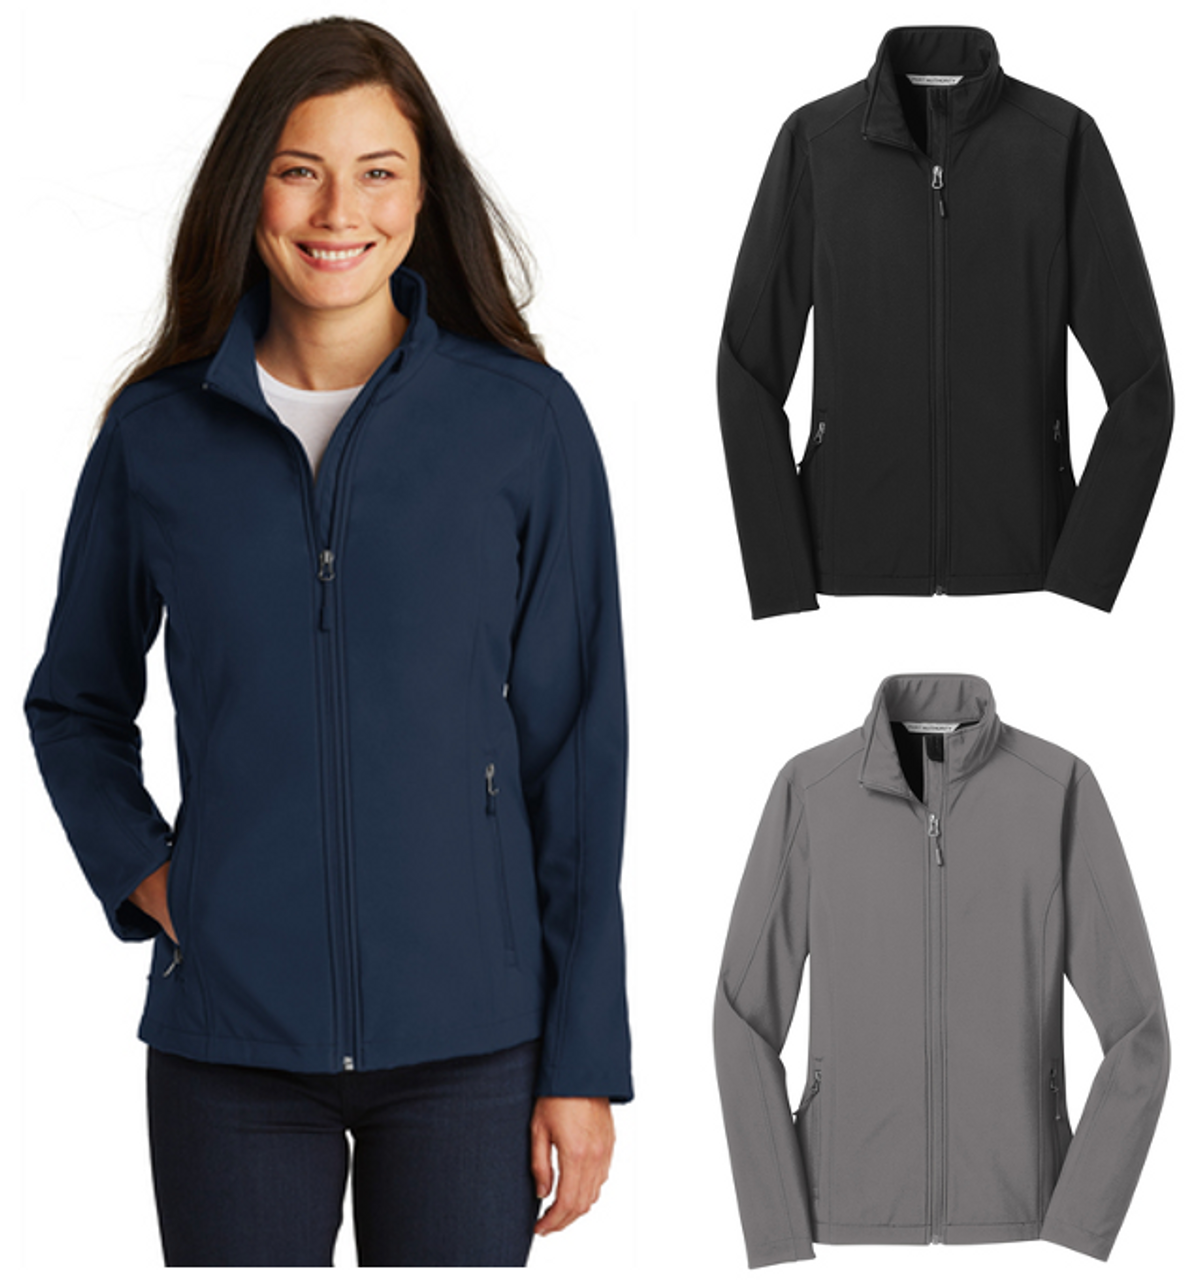 Port Authority Ladies Active Soft Shell Jacket - LUCKY PRINTS